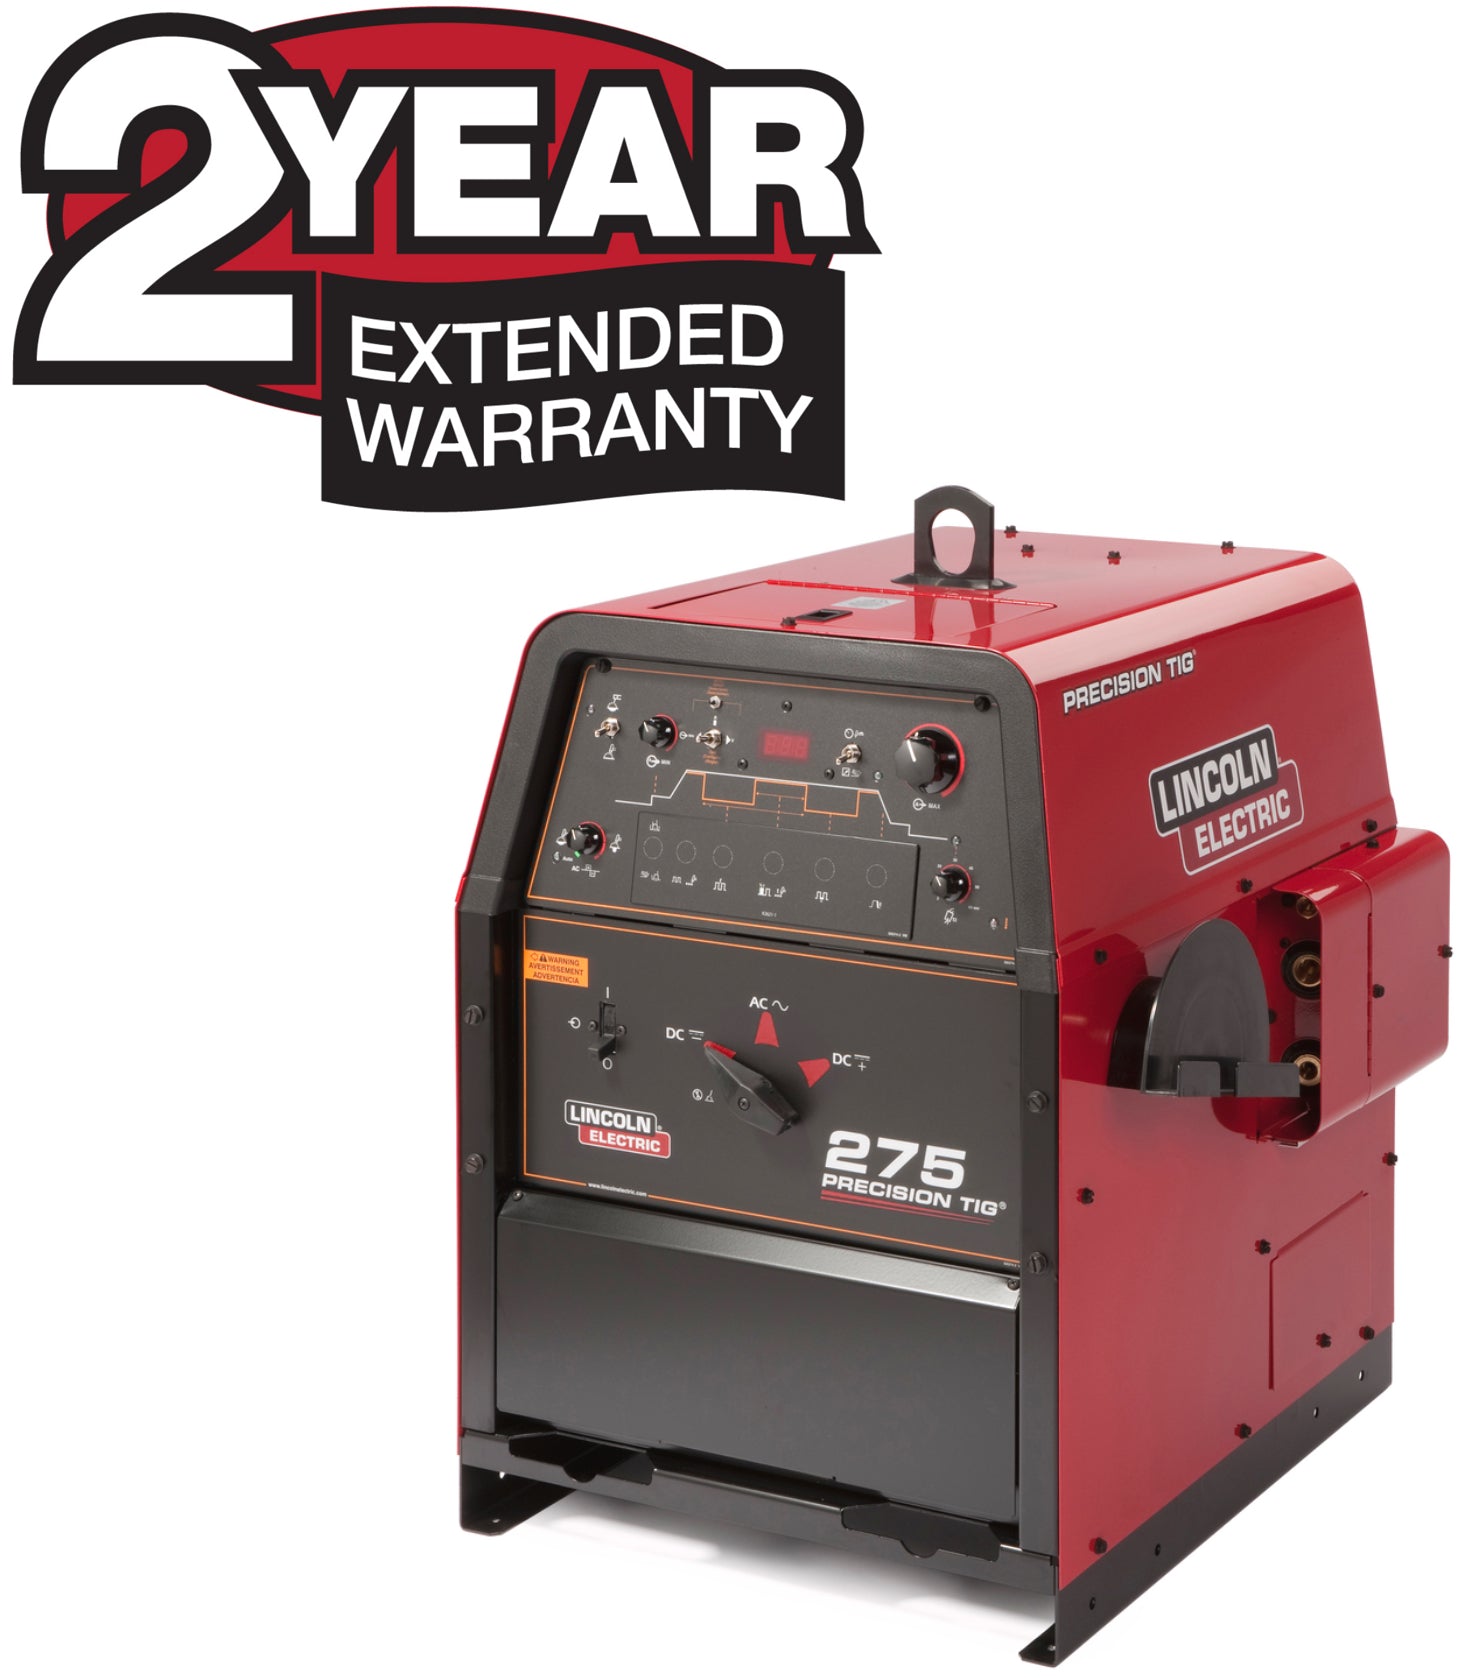 Lincoln 2-Year Extended Warranty - Precision TIG 275 X2619